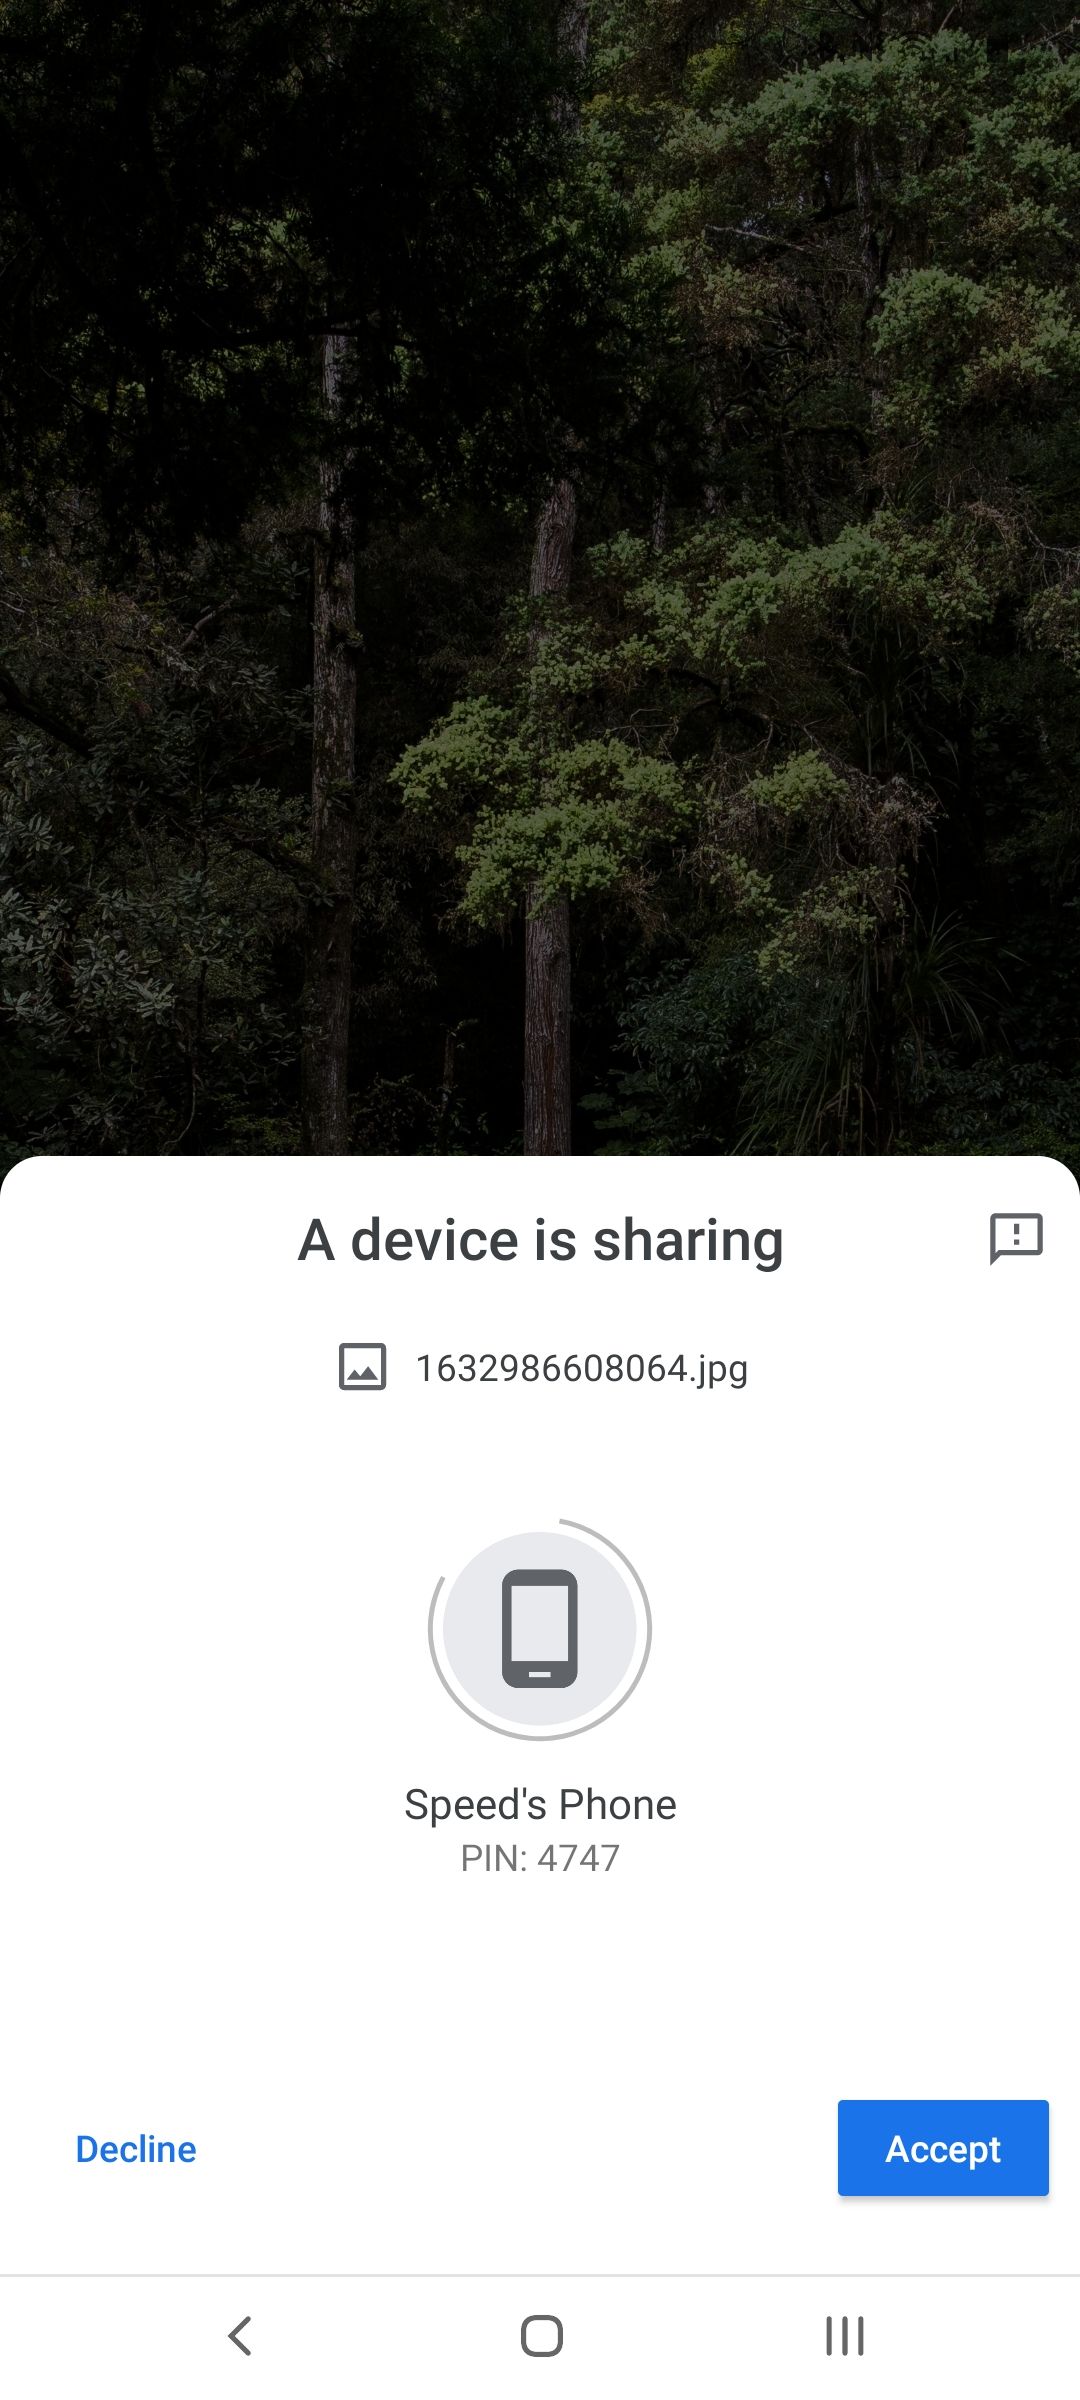 File Sharing Dialog Box in Nearby Share